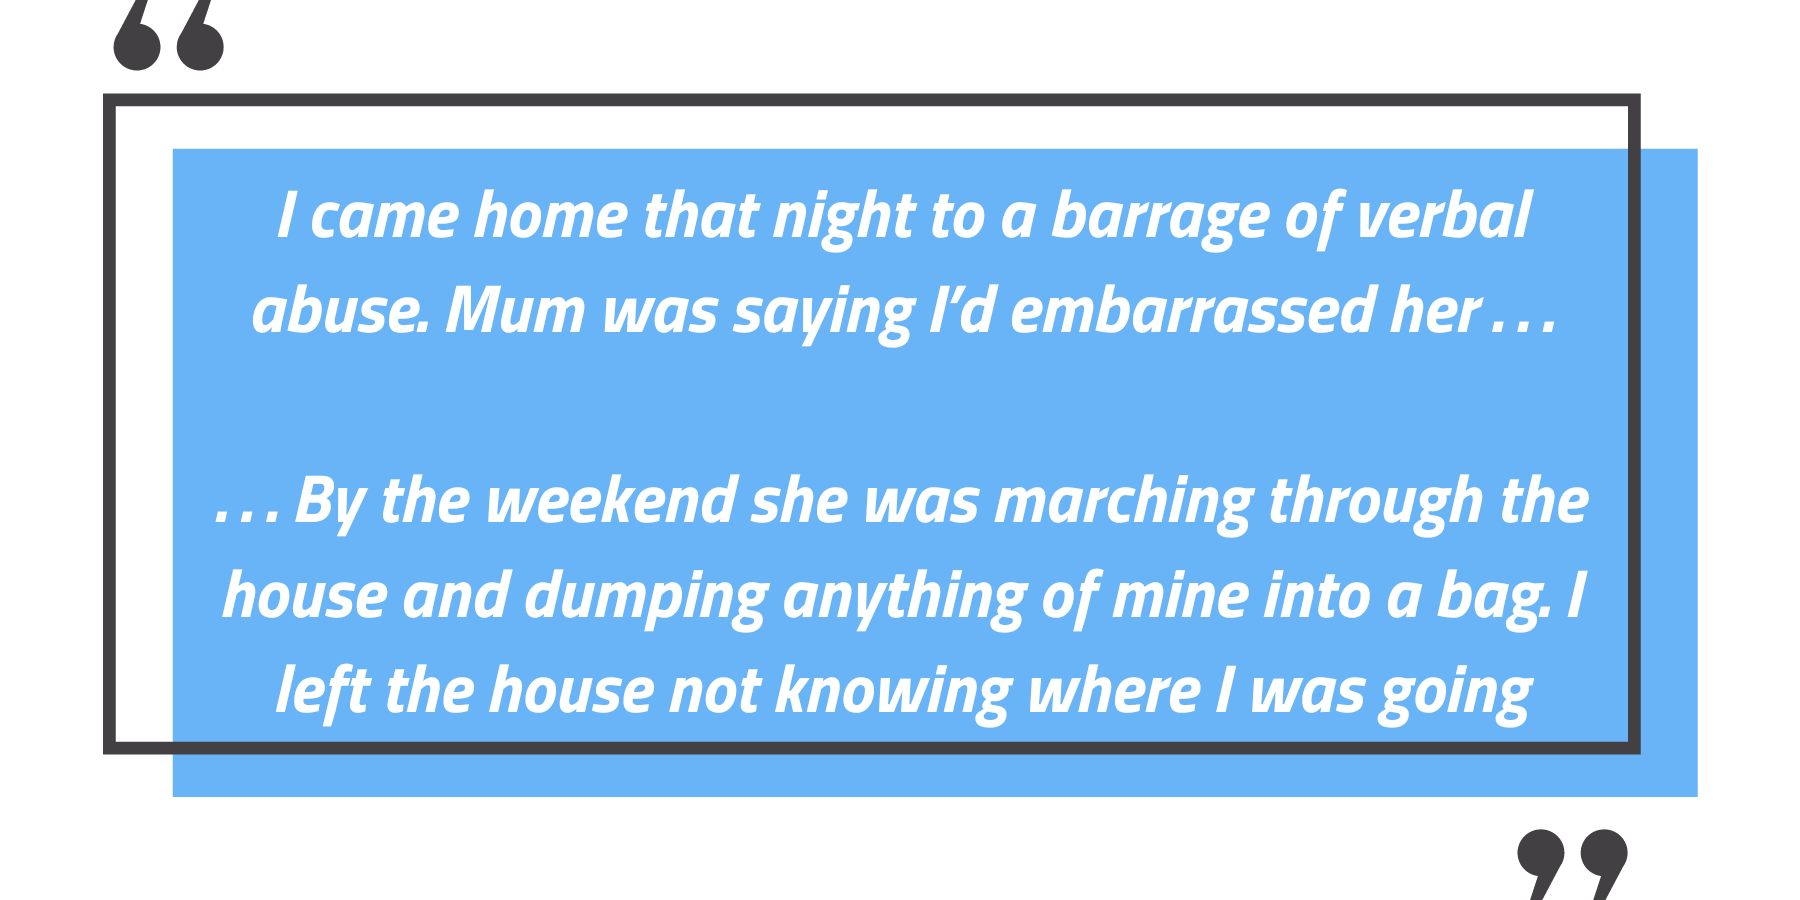 Quote reads, 'I came home that night to a barrage of verbal abuse. Mum was saying I’d embarrassed her . . .

. . . By the weekend she was marching through the house and dumping anything of mine into a bag. I left the house not knowing where I was going' - LGBTQIA and sleeping rough